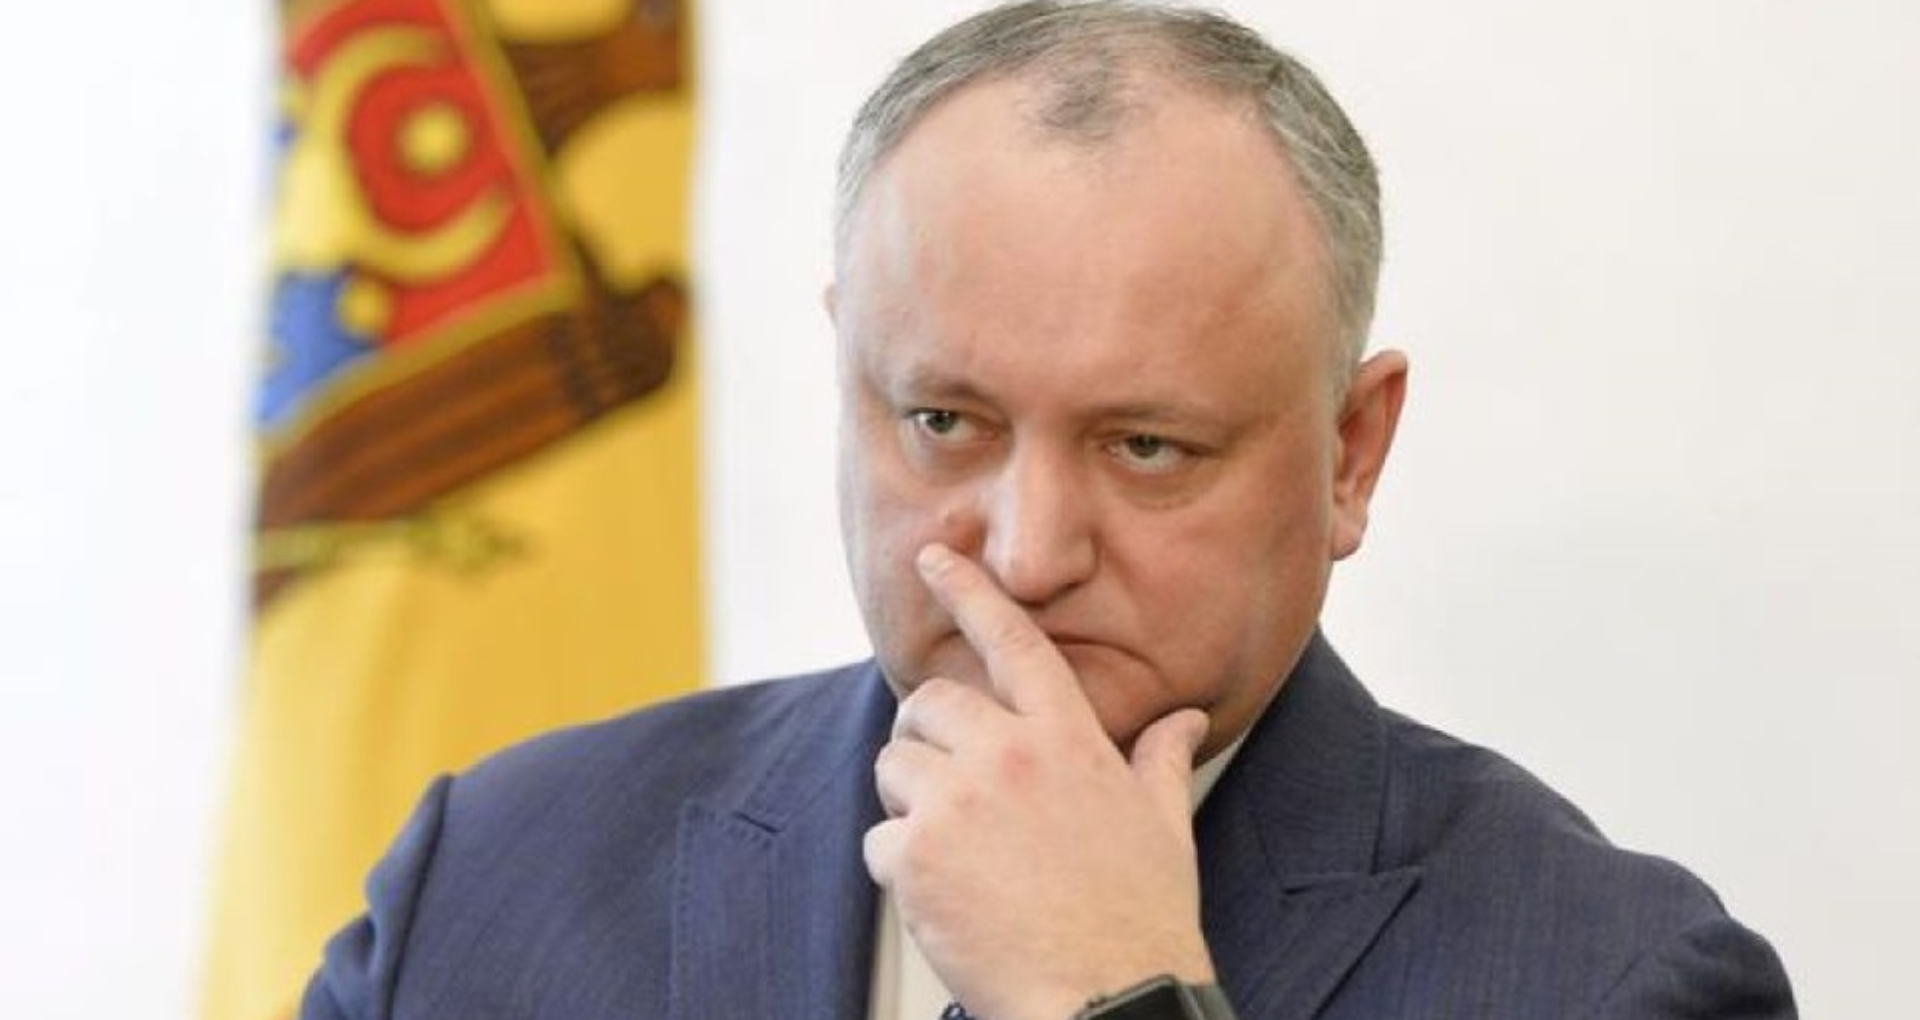 Judges of the Chisinau Court of Appeal rejected the request of the former head of the Anti-Corruption Prosecutor’s Office, Viorel Morari, to annul the order dismissing him from the prosecutor’s office